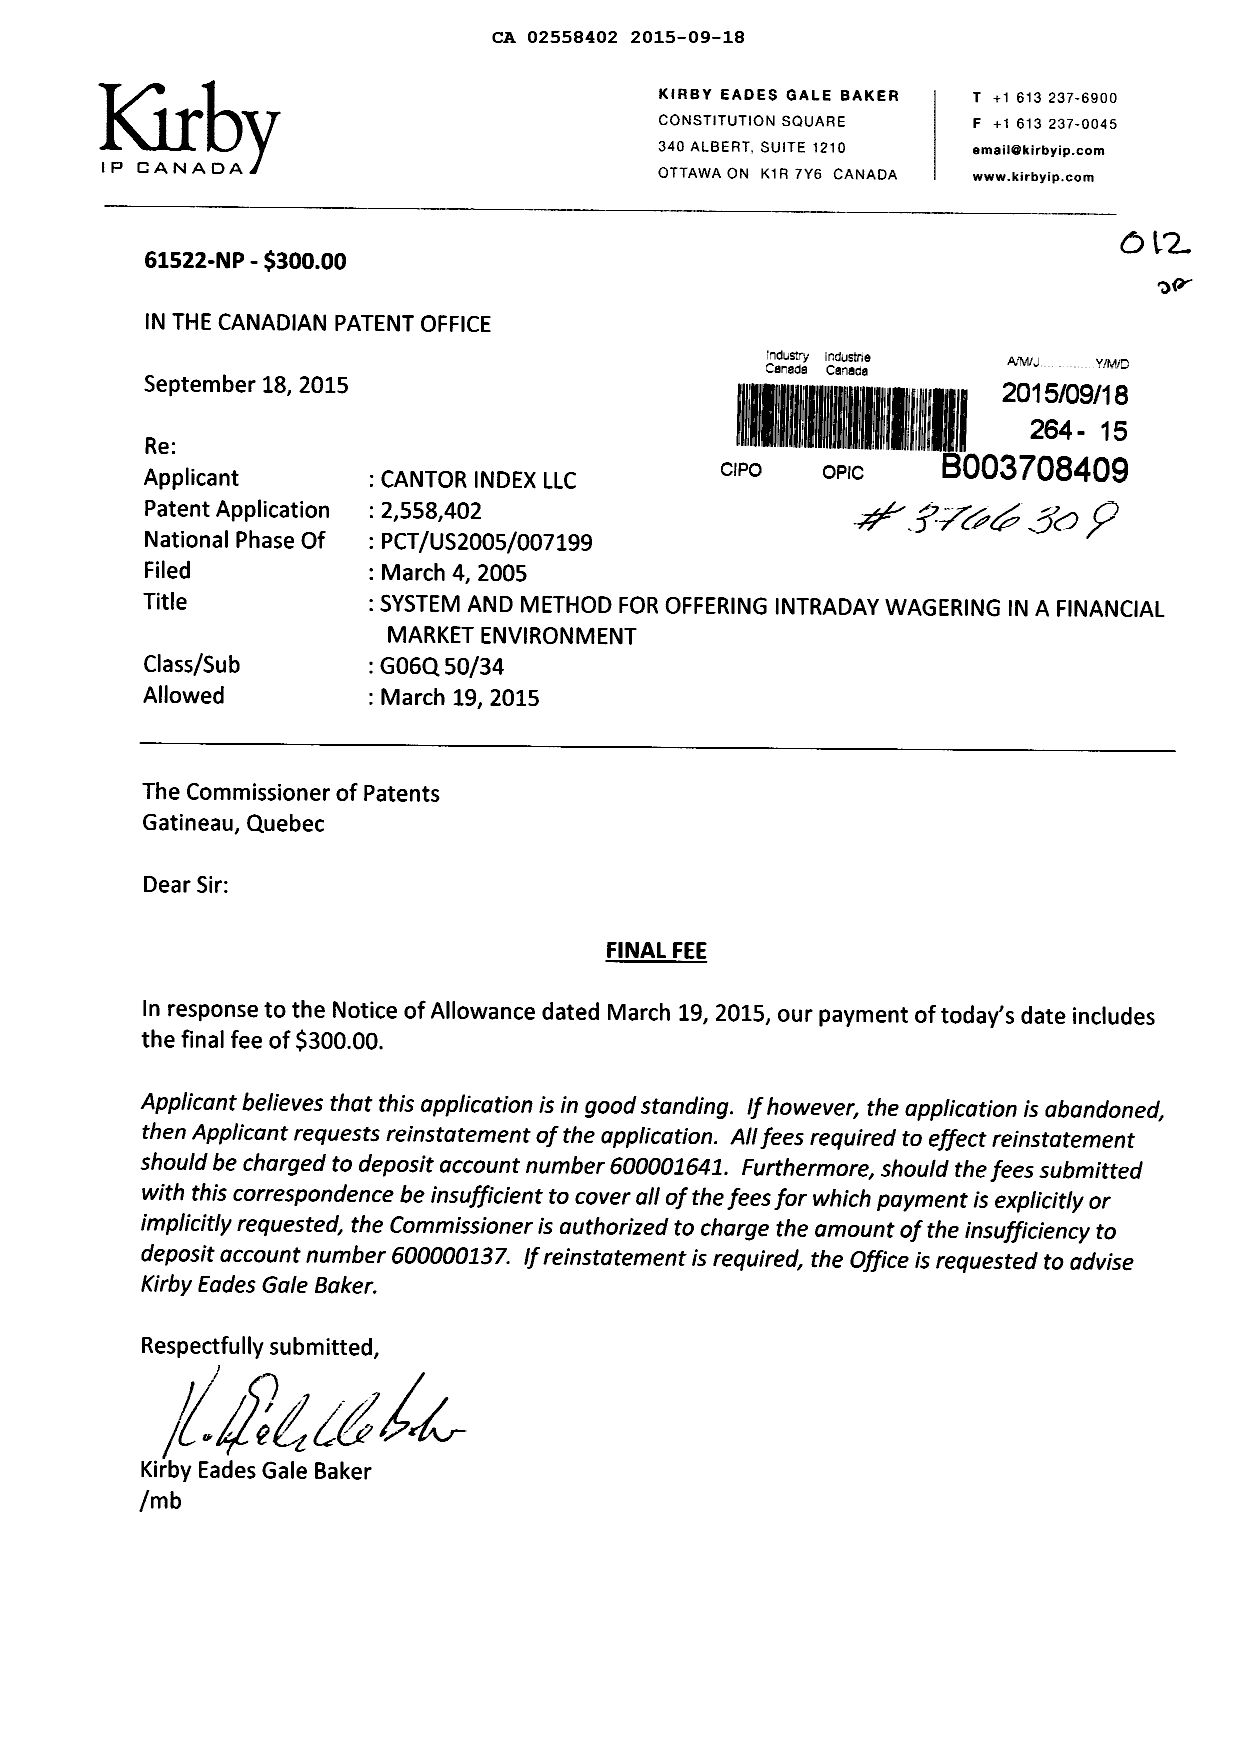 Canadian Patent Document 2558402. Final Fee 20150918. Image 1 of 1